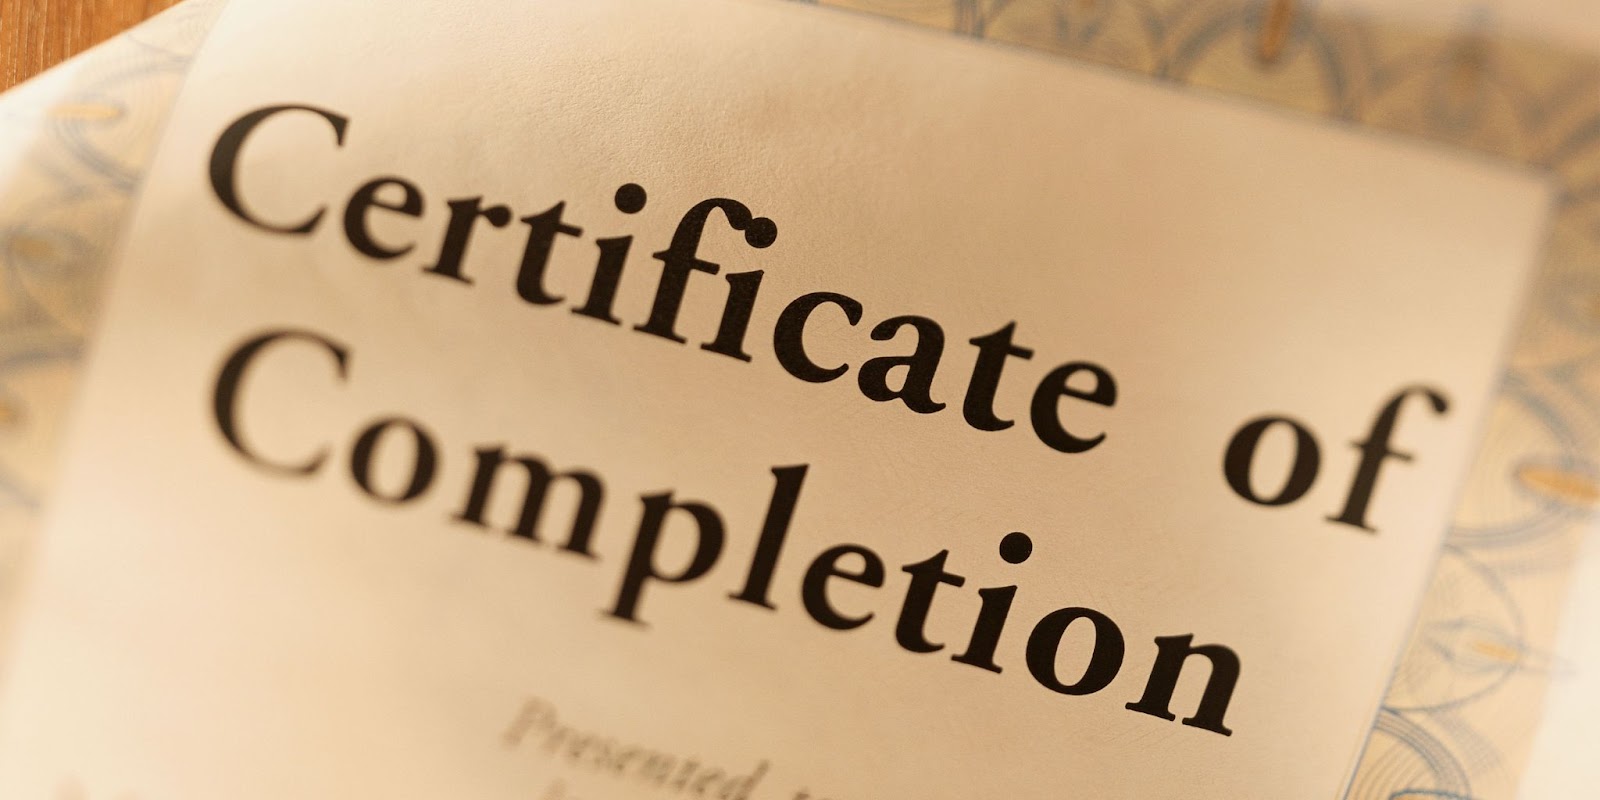 Receive your certificate of completion